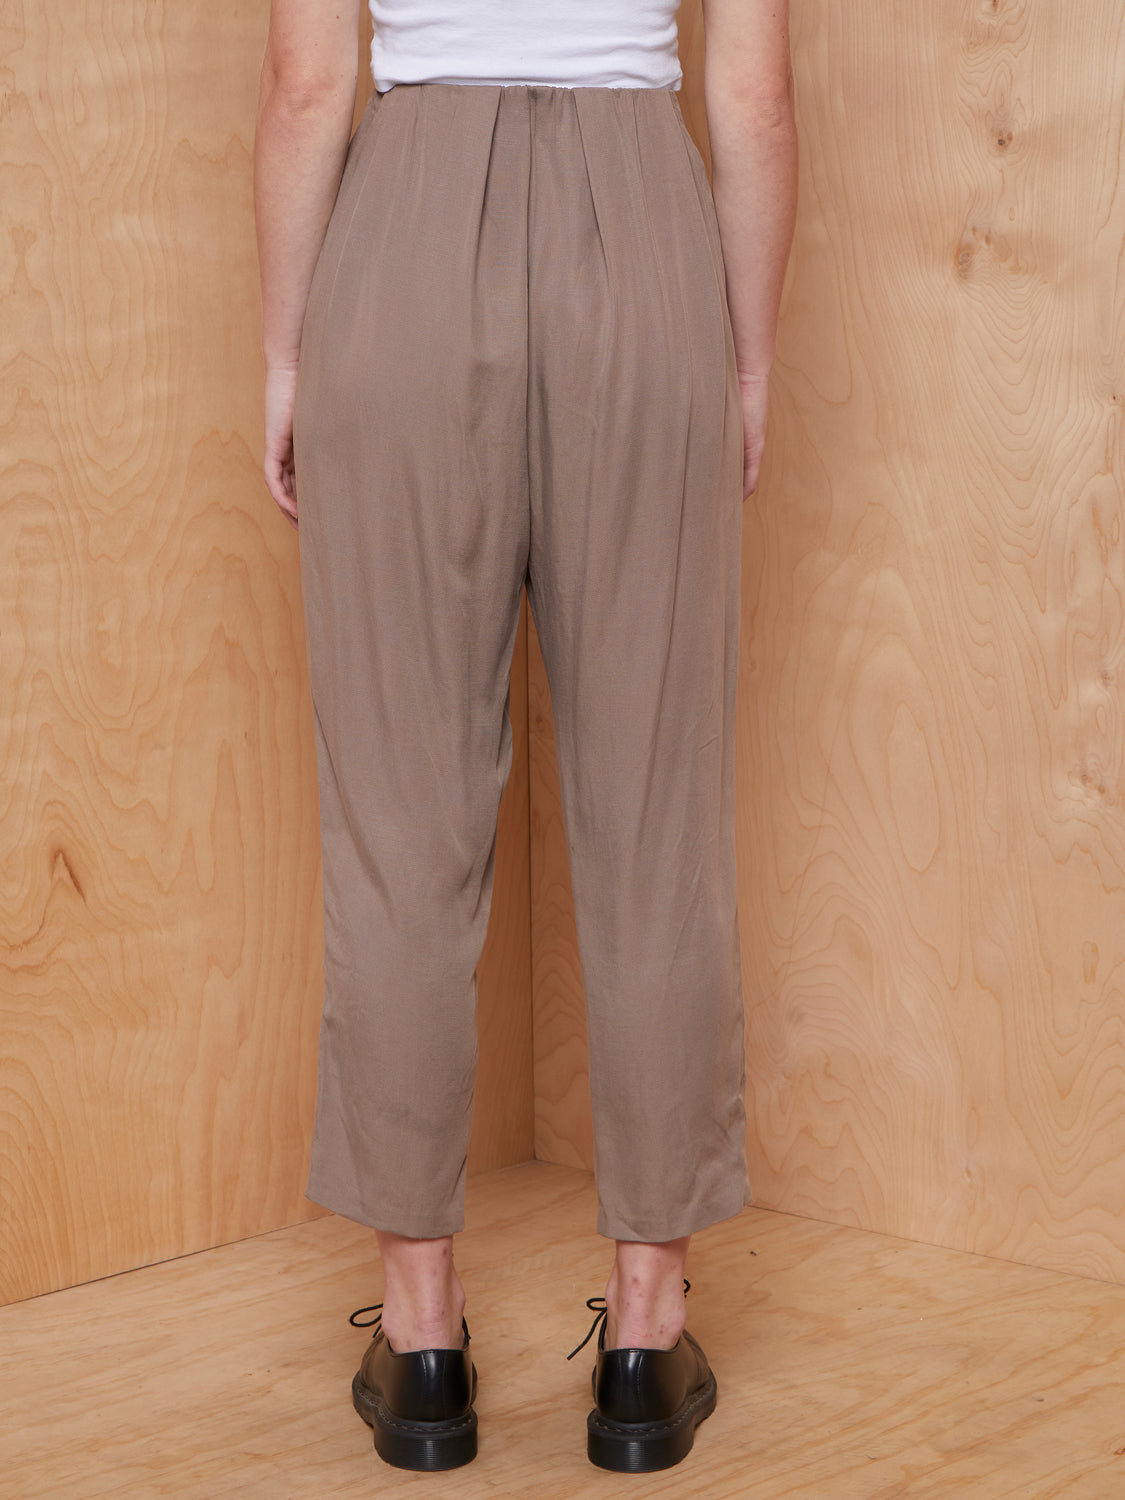 Camilla and Marc Grey Pleated Realm Trouser